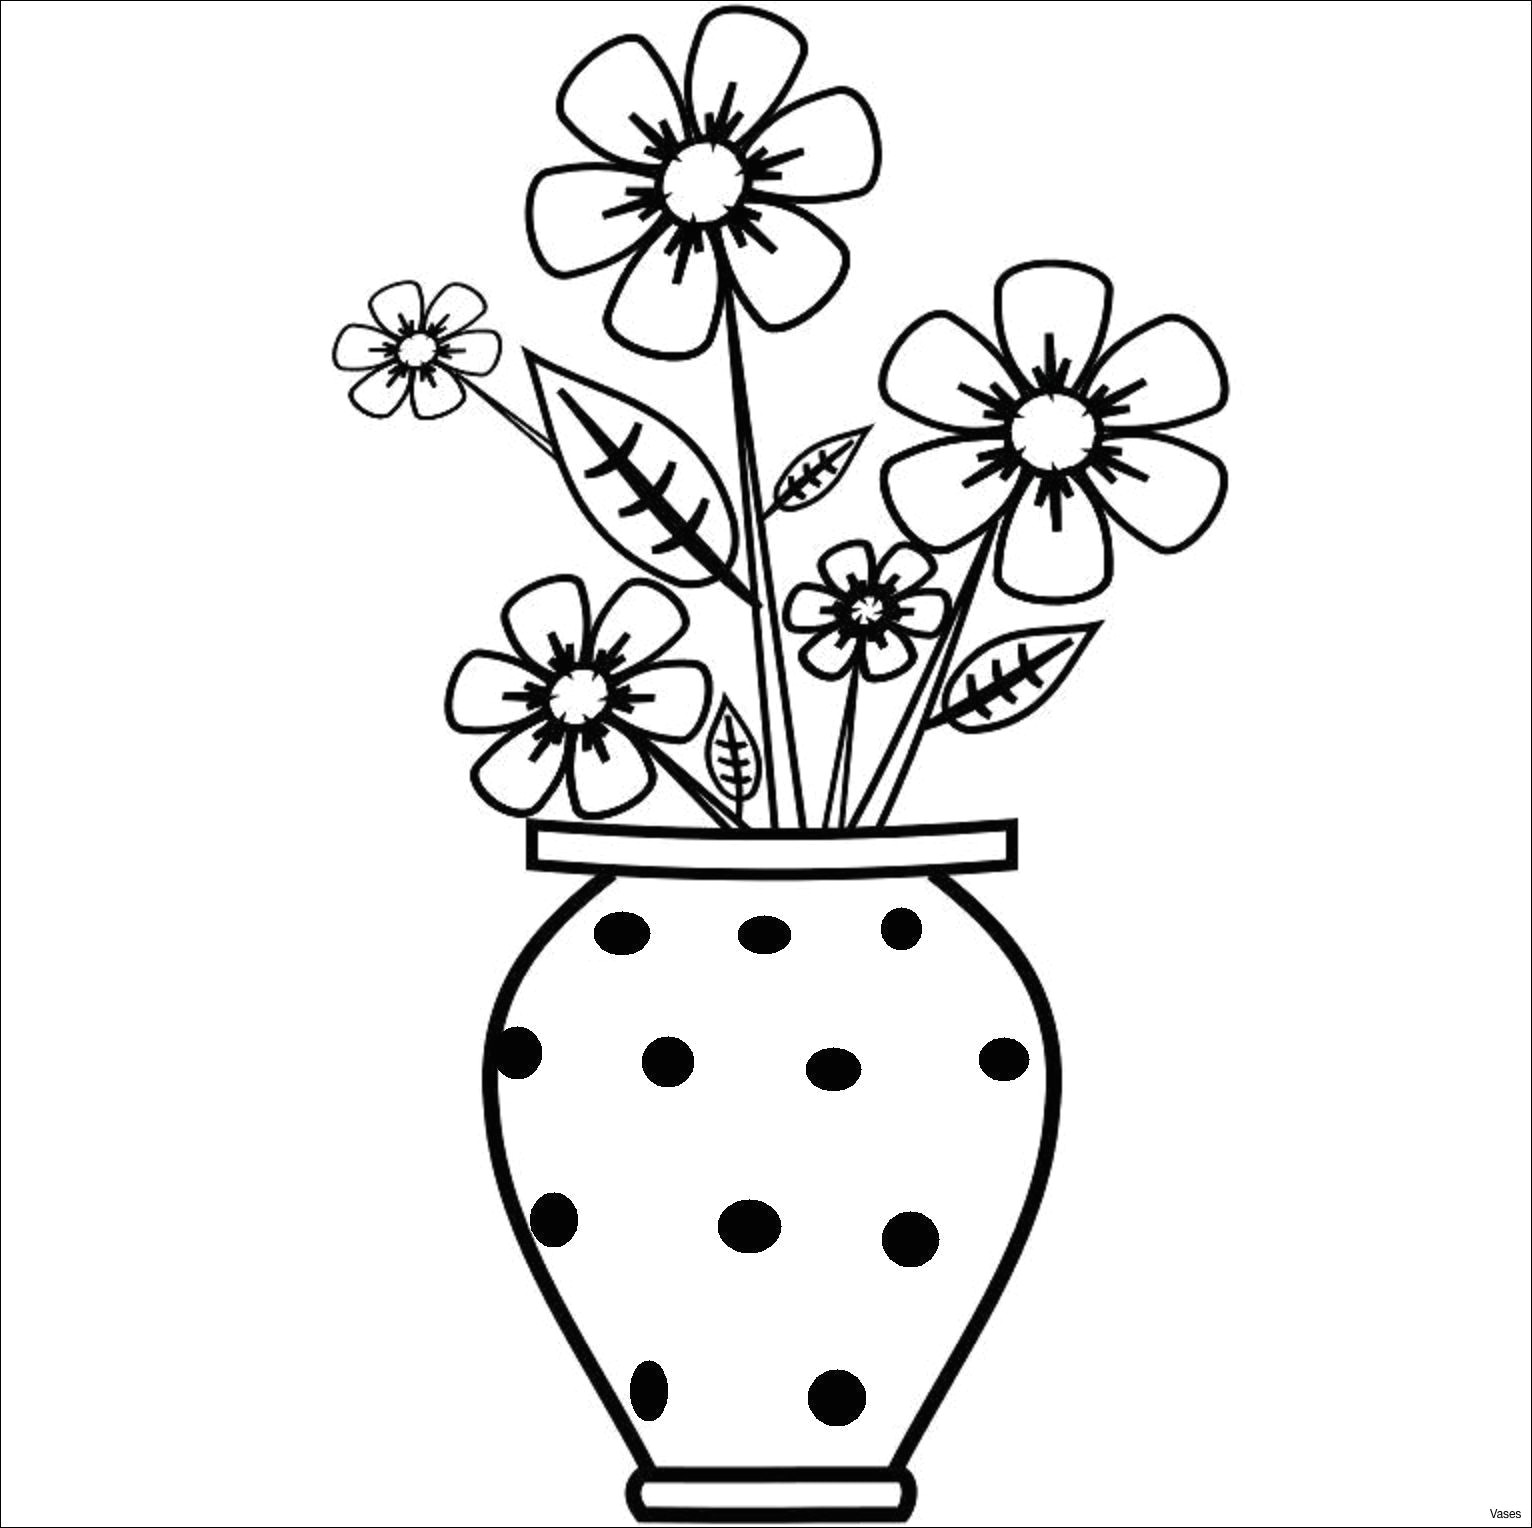 Easy Drawing with Steps Images Of Easy Drawings Vase Art Drawings How to Draw A Vase Step 2h